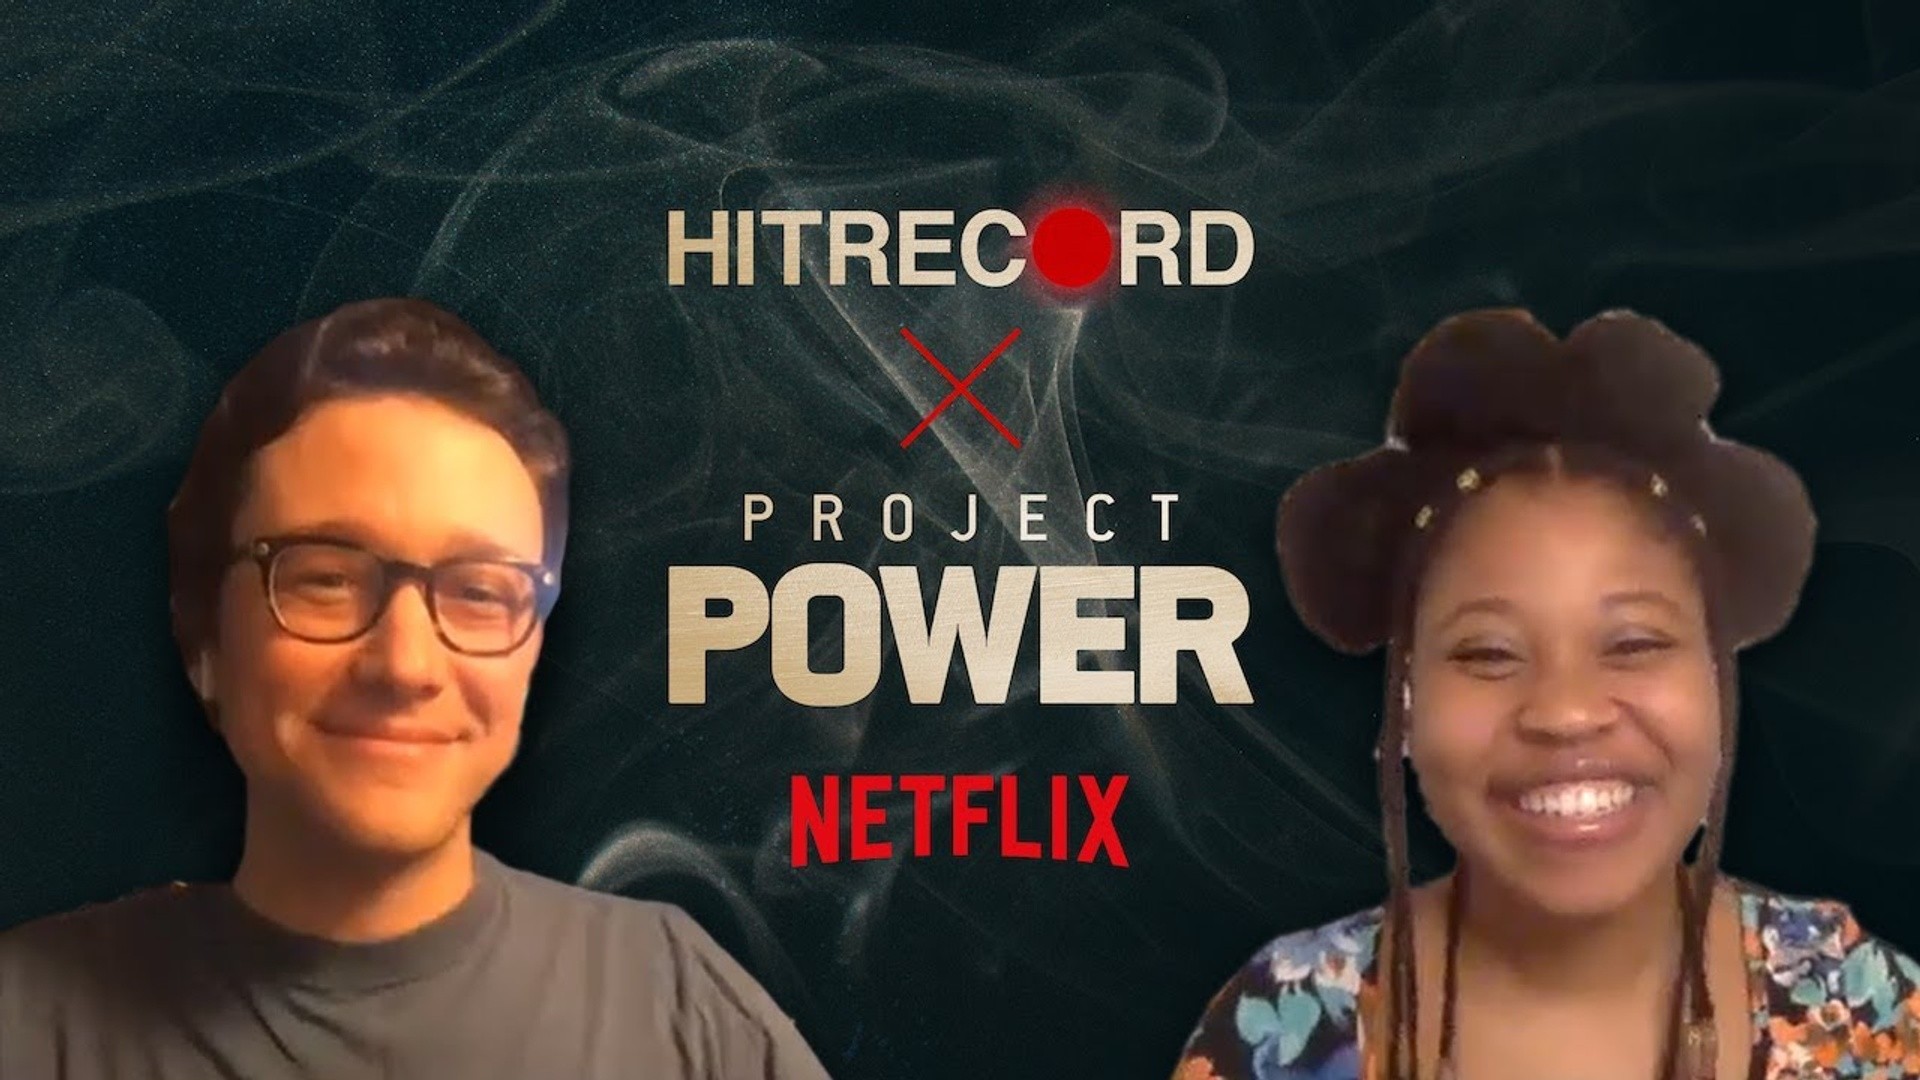 HITRECORD's Joseph Gordon-Levitt calls on fans across Asia to contribute to a music video for his new Netflix film, Project Power